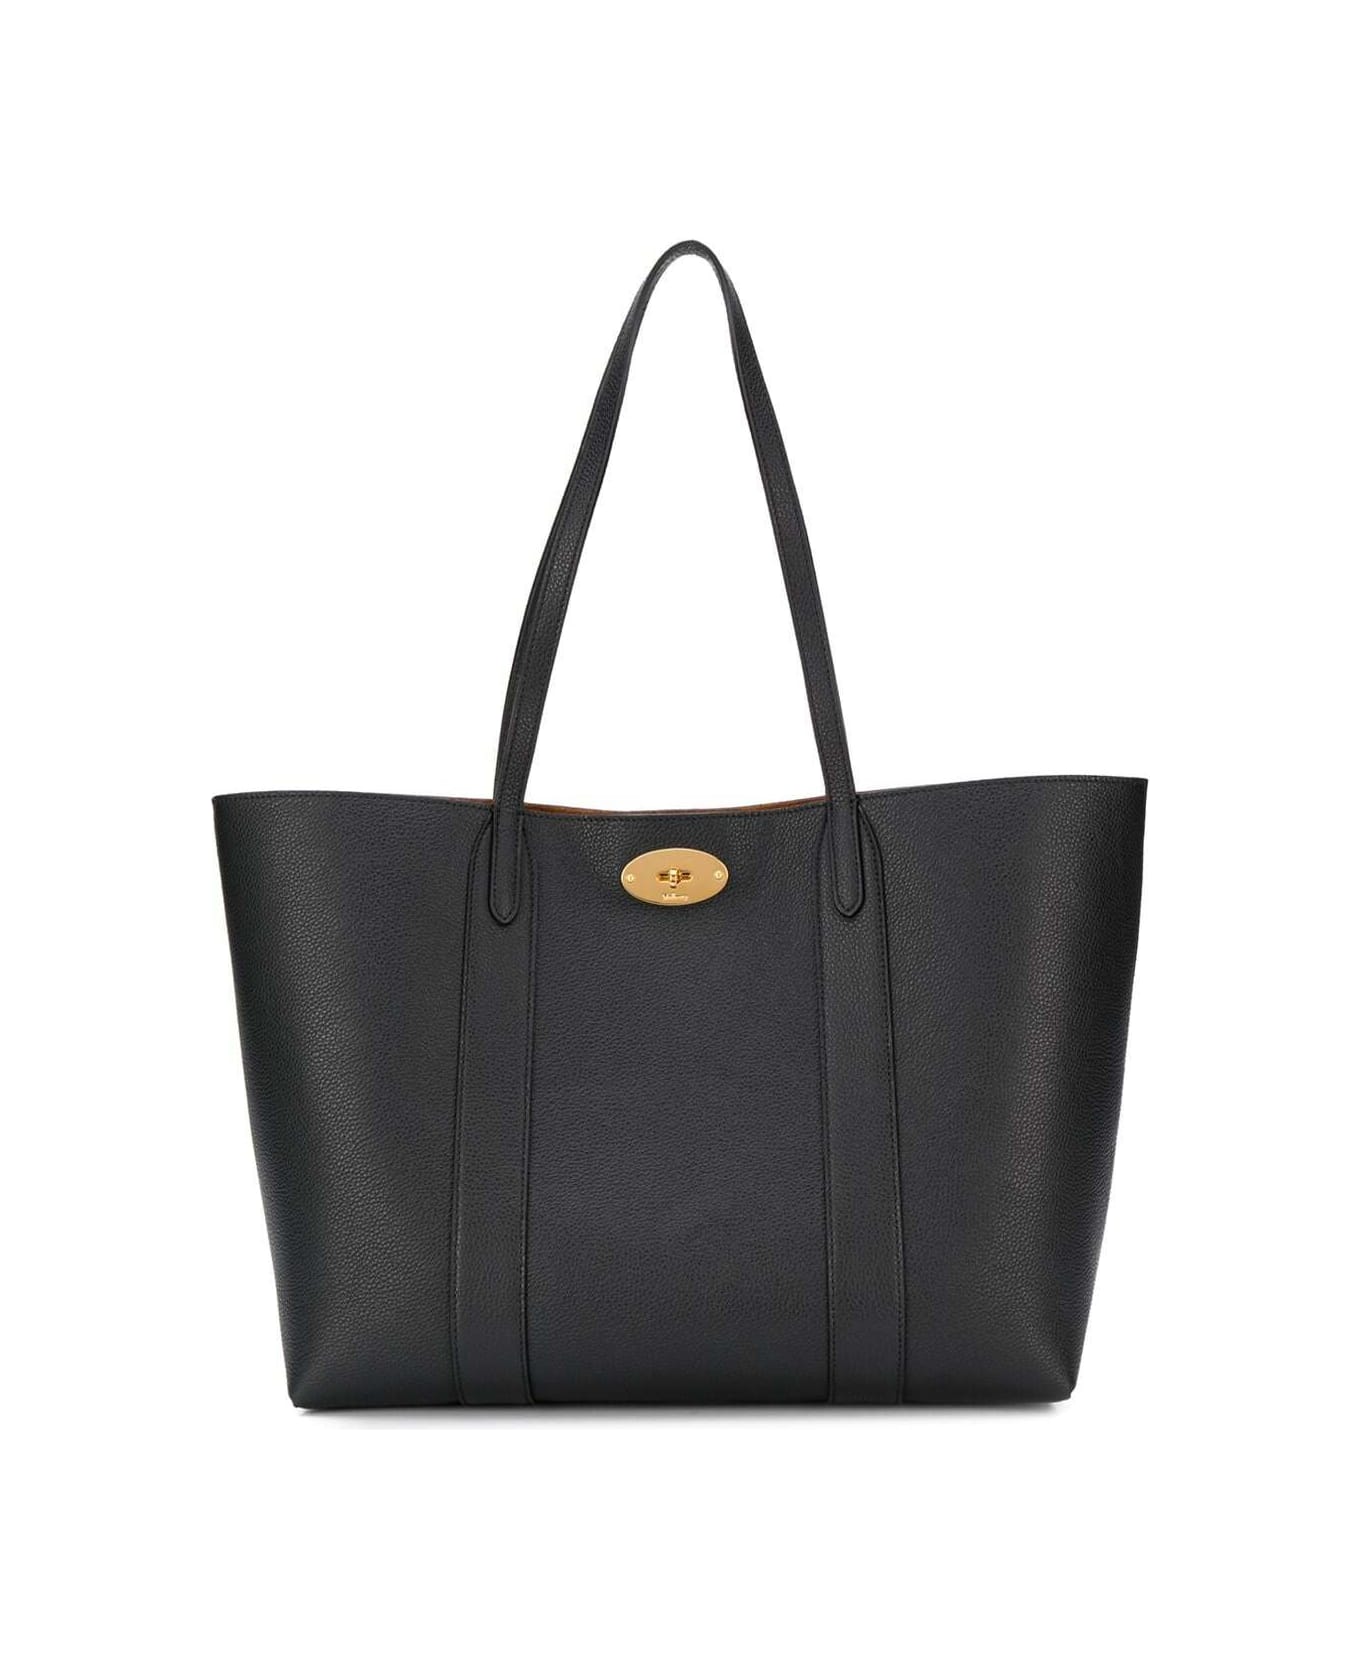 Mulberry Small Tote Black Leather Shopper Bag Mulberry Woman - Black